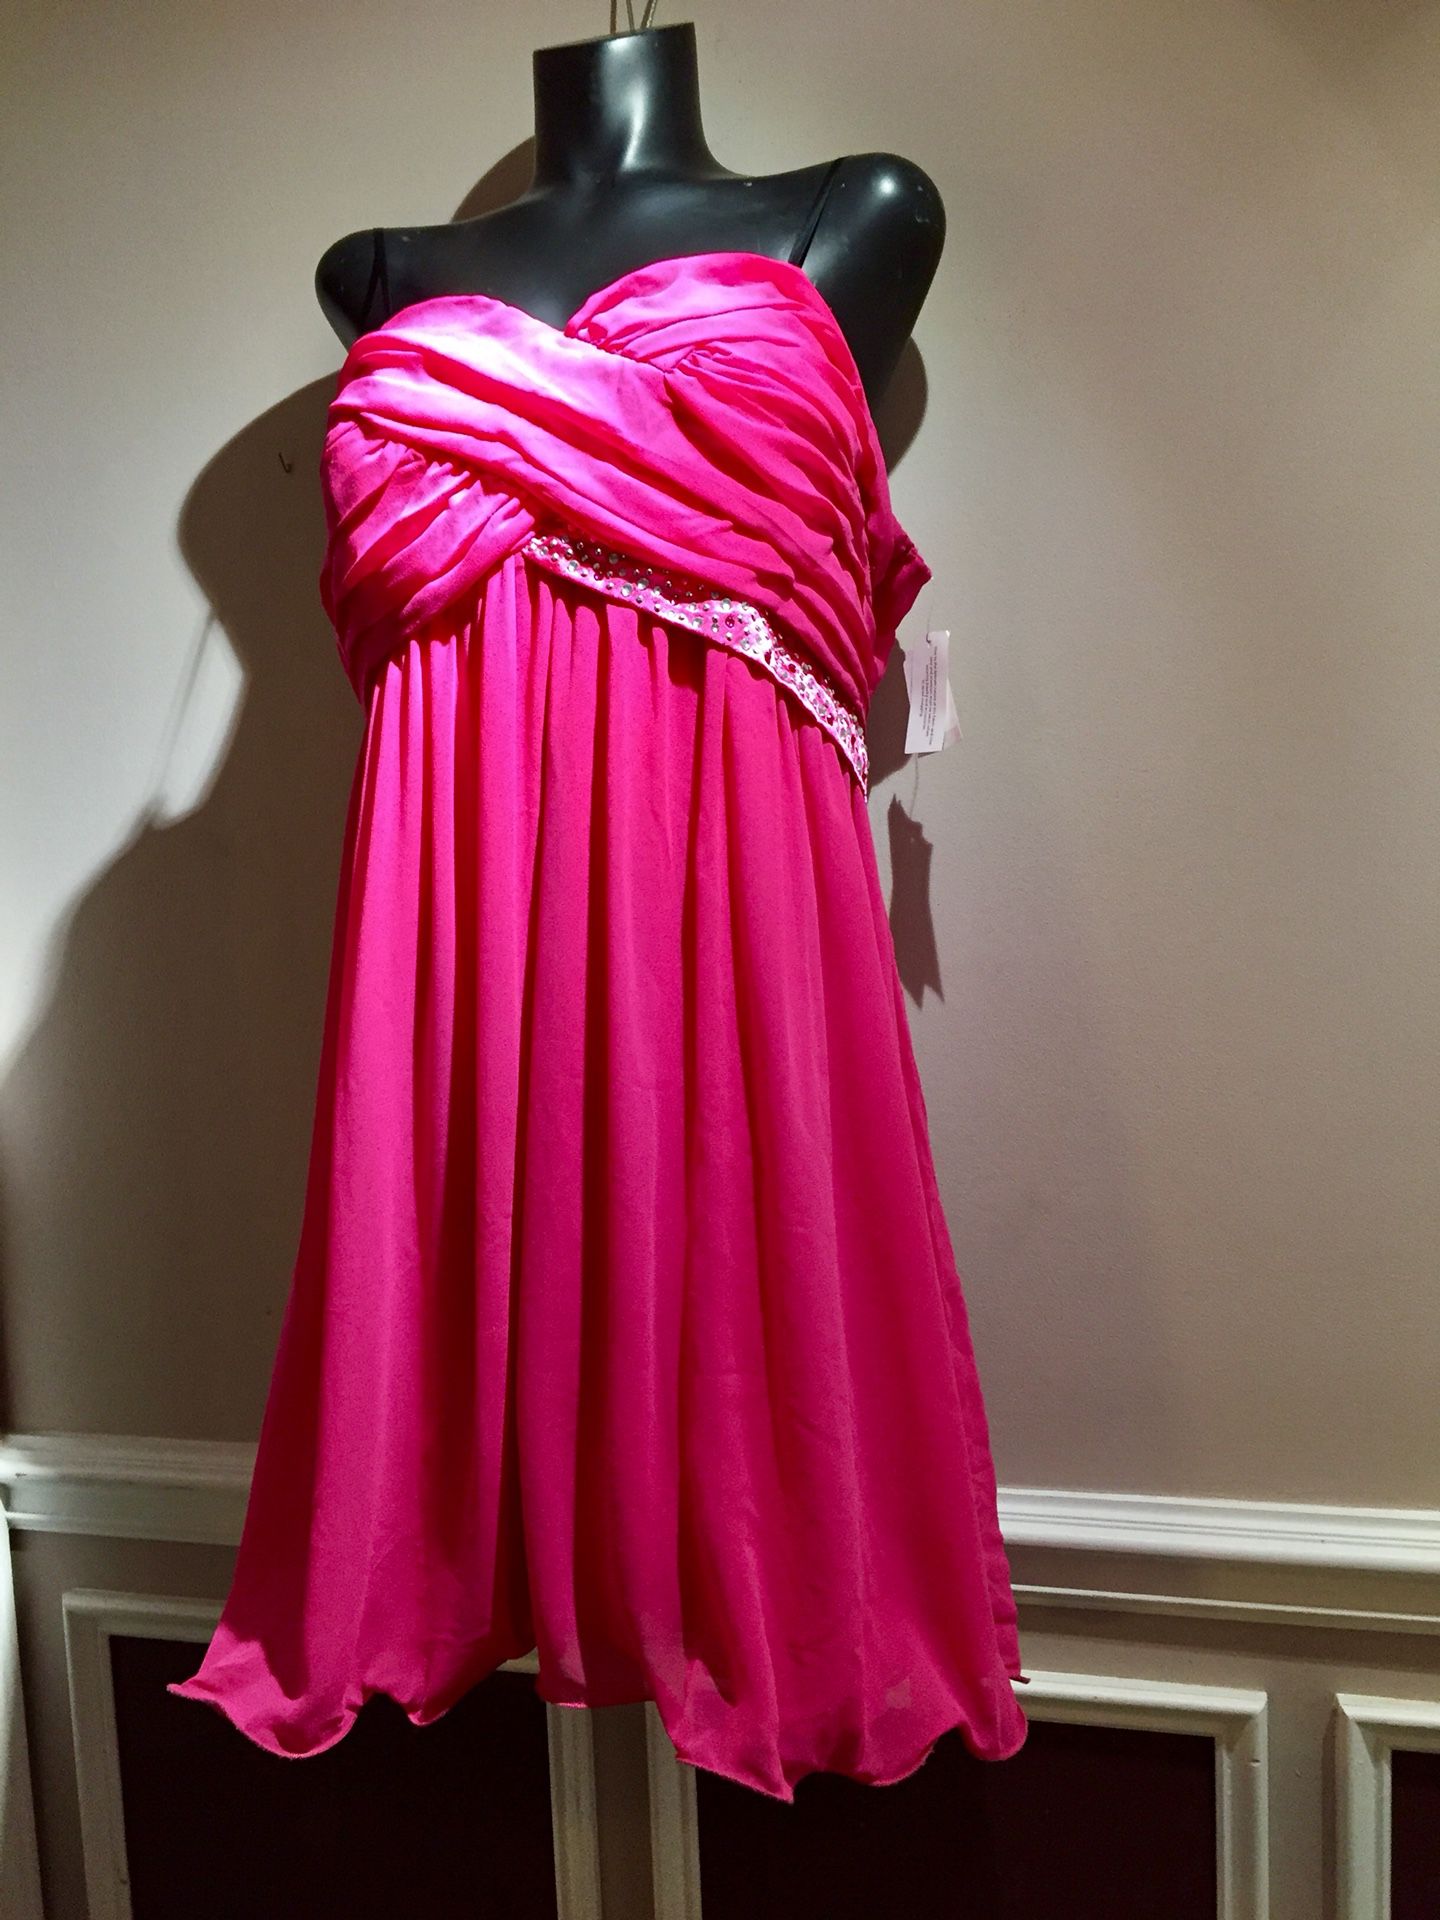 NWT Debs Hot Pink Dress Formal Prom Dance Plus